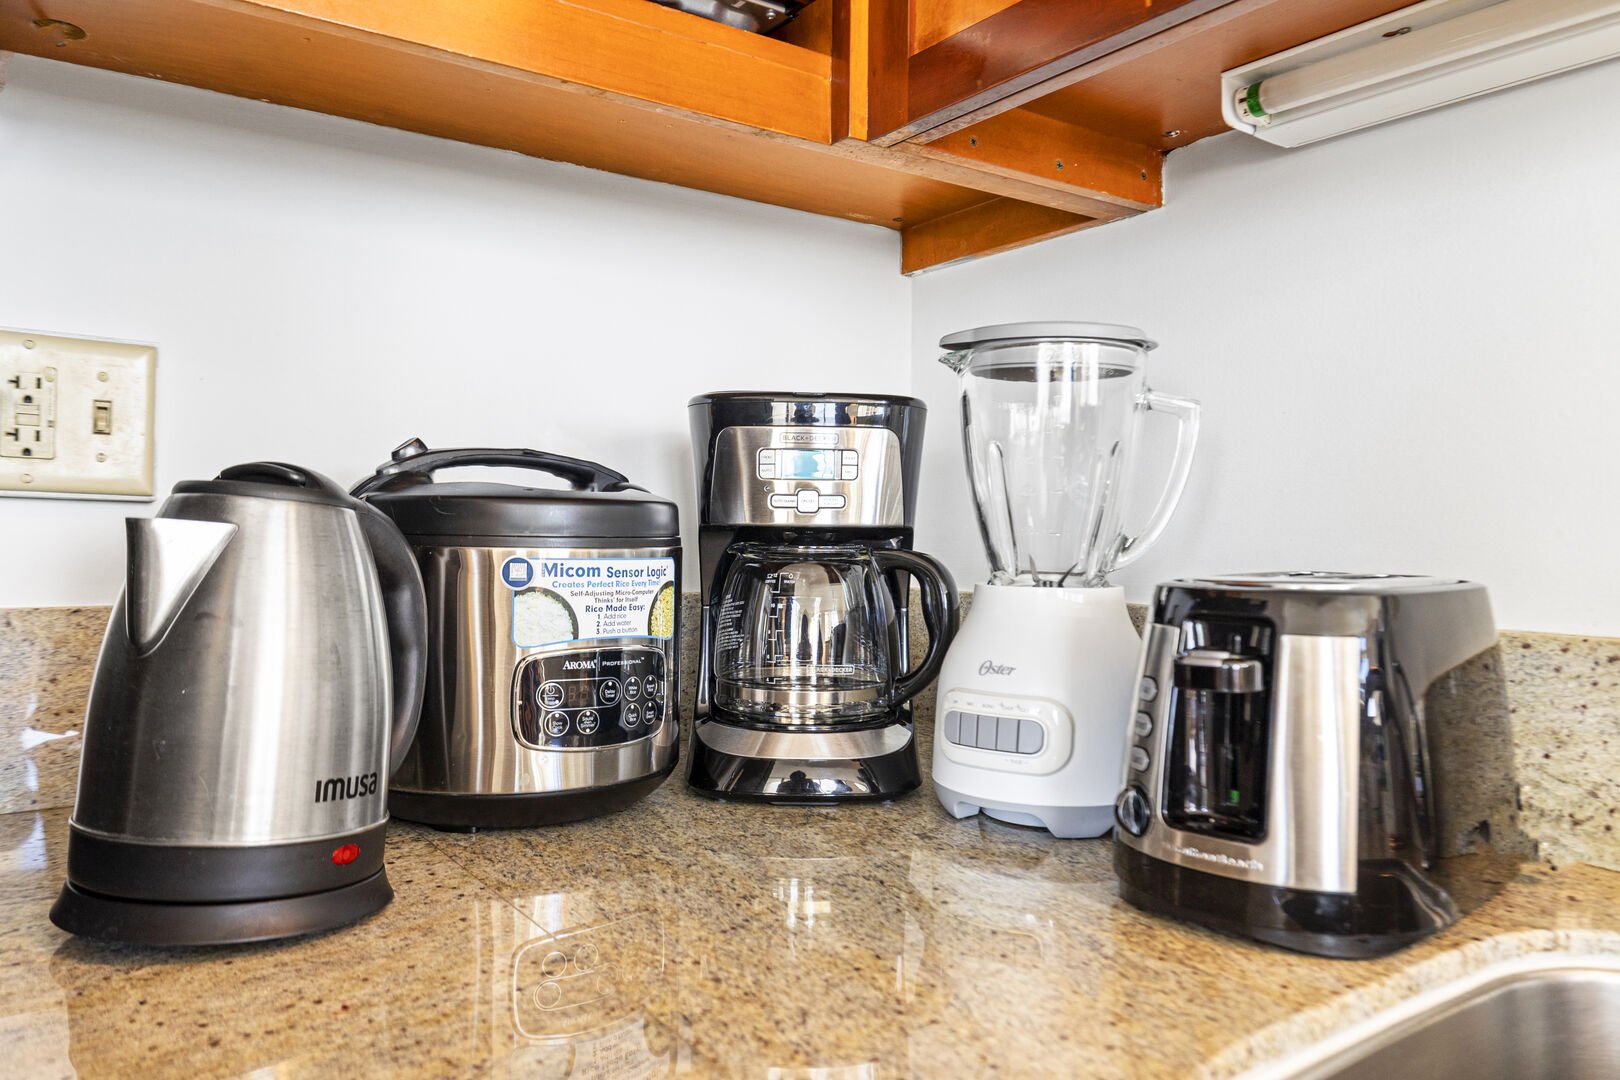 Available appliances in the kitchen